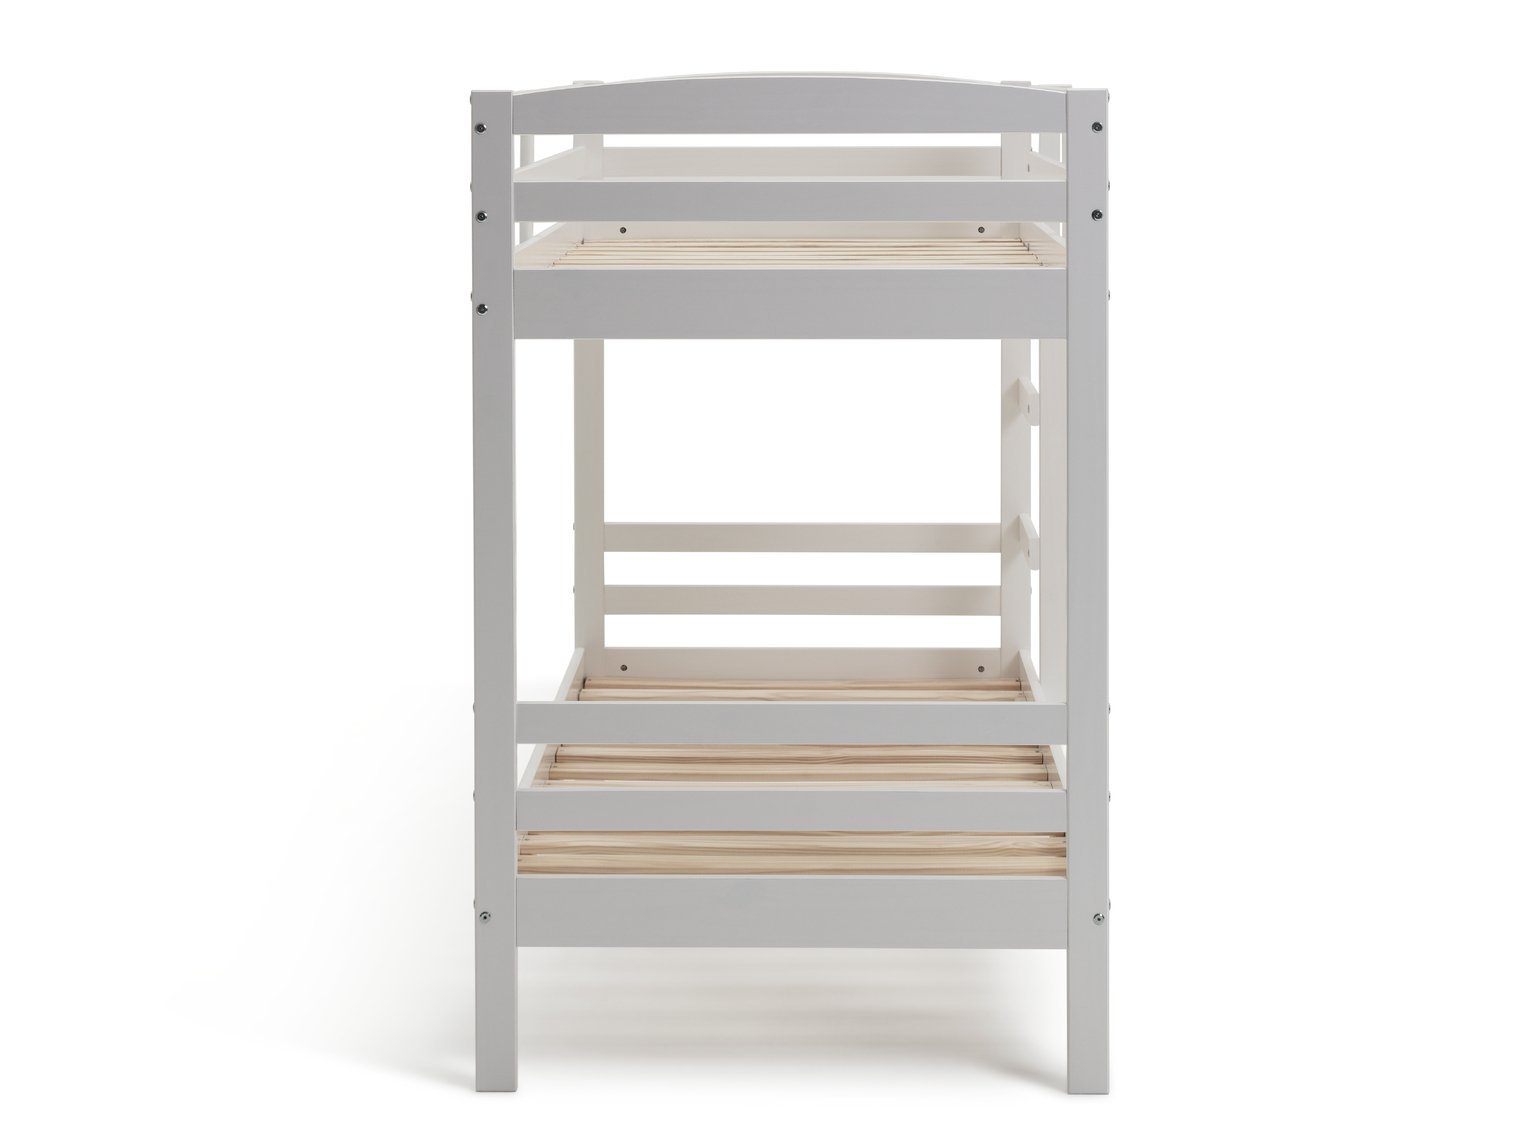 shorty bunk bed with mattress uk